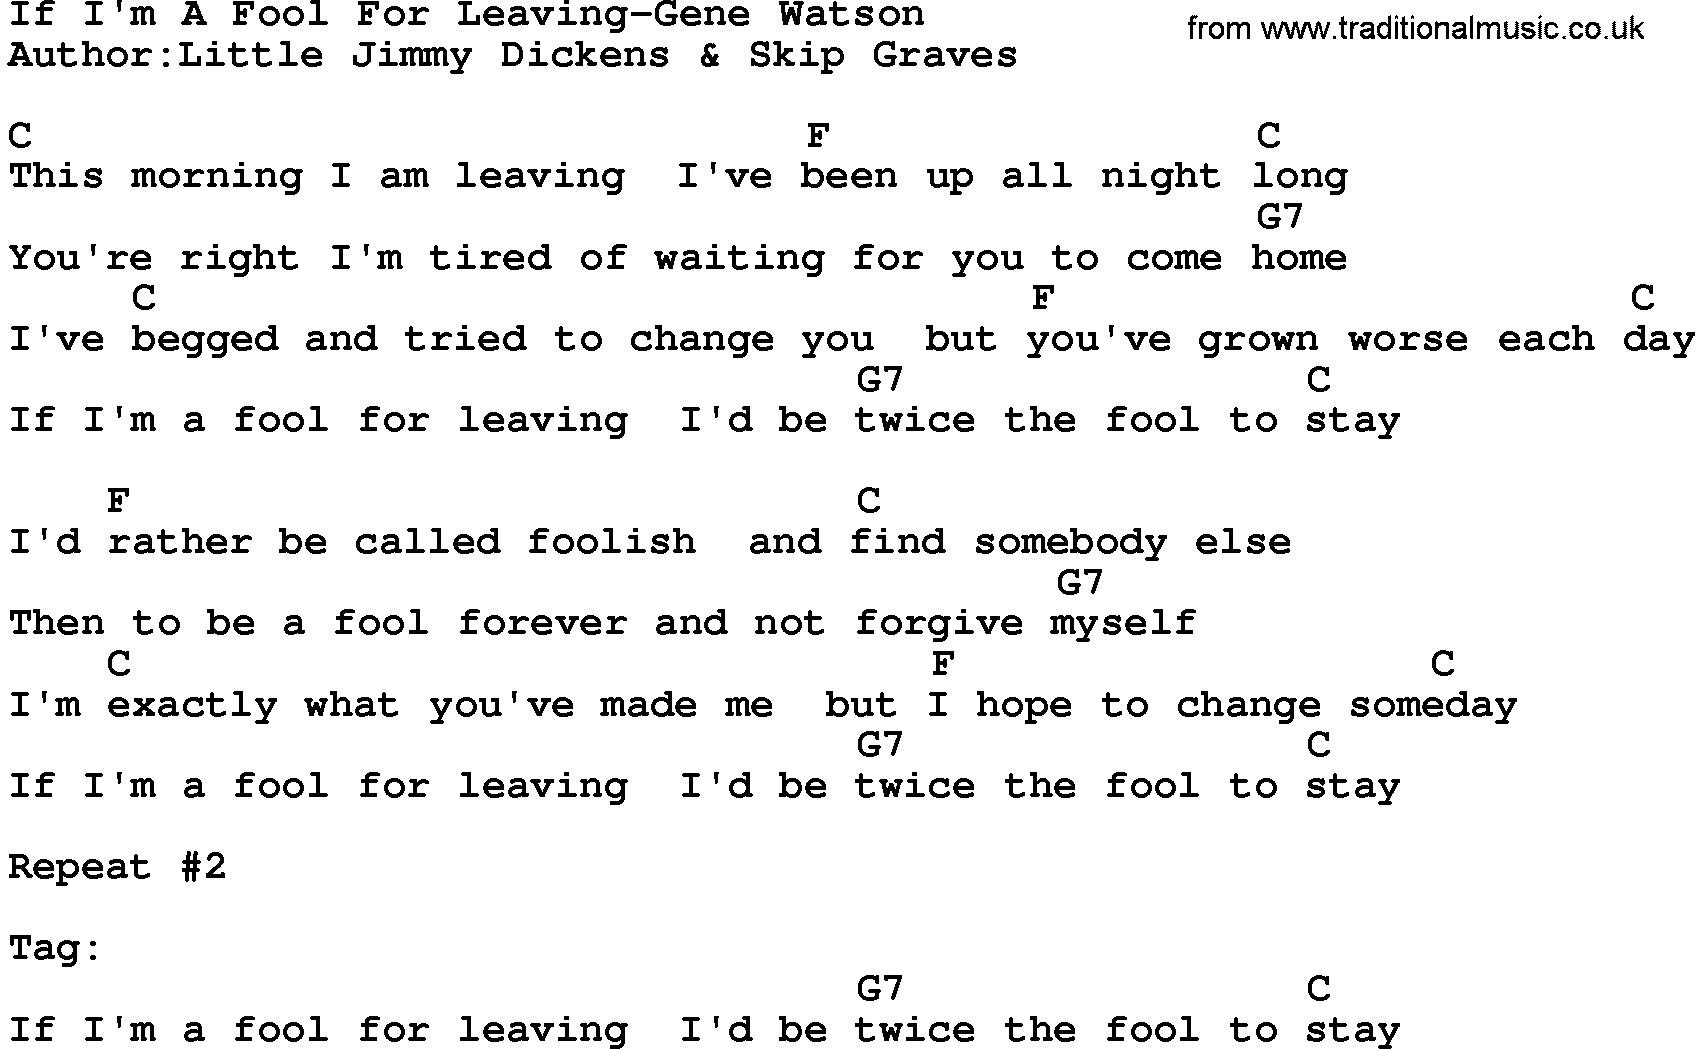 Country music song: If I'm A Fool For Leaving-Gene Watson lyrics and chords